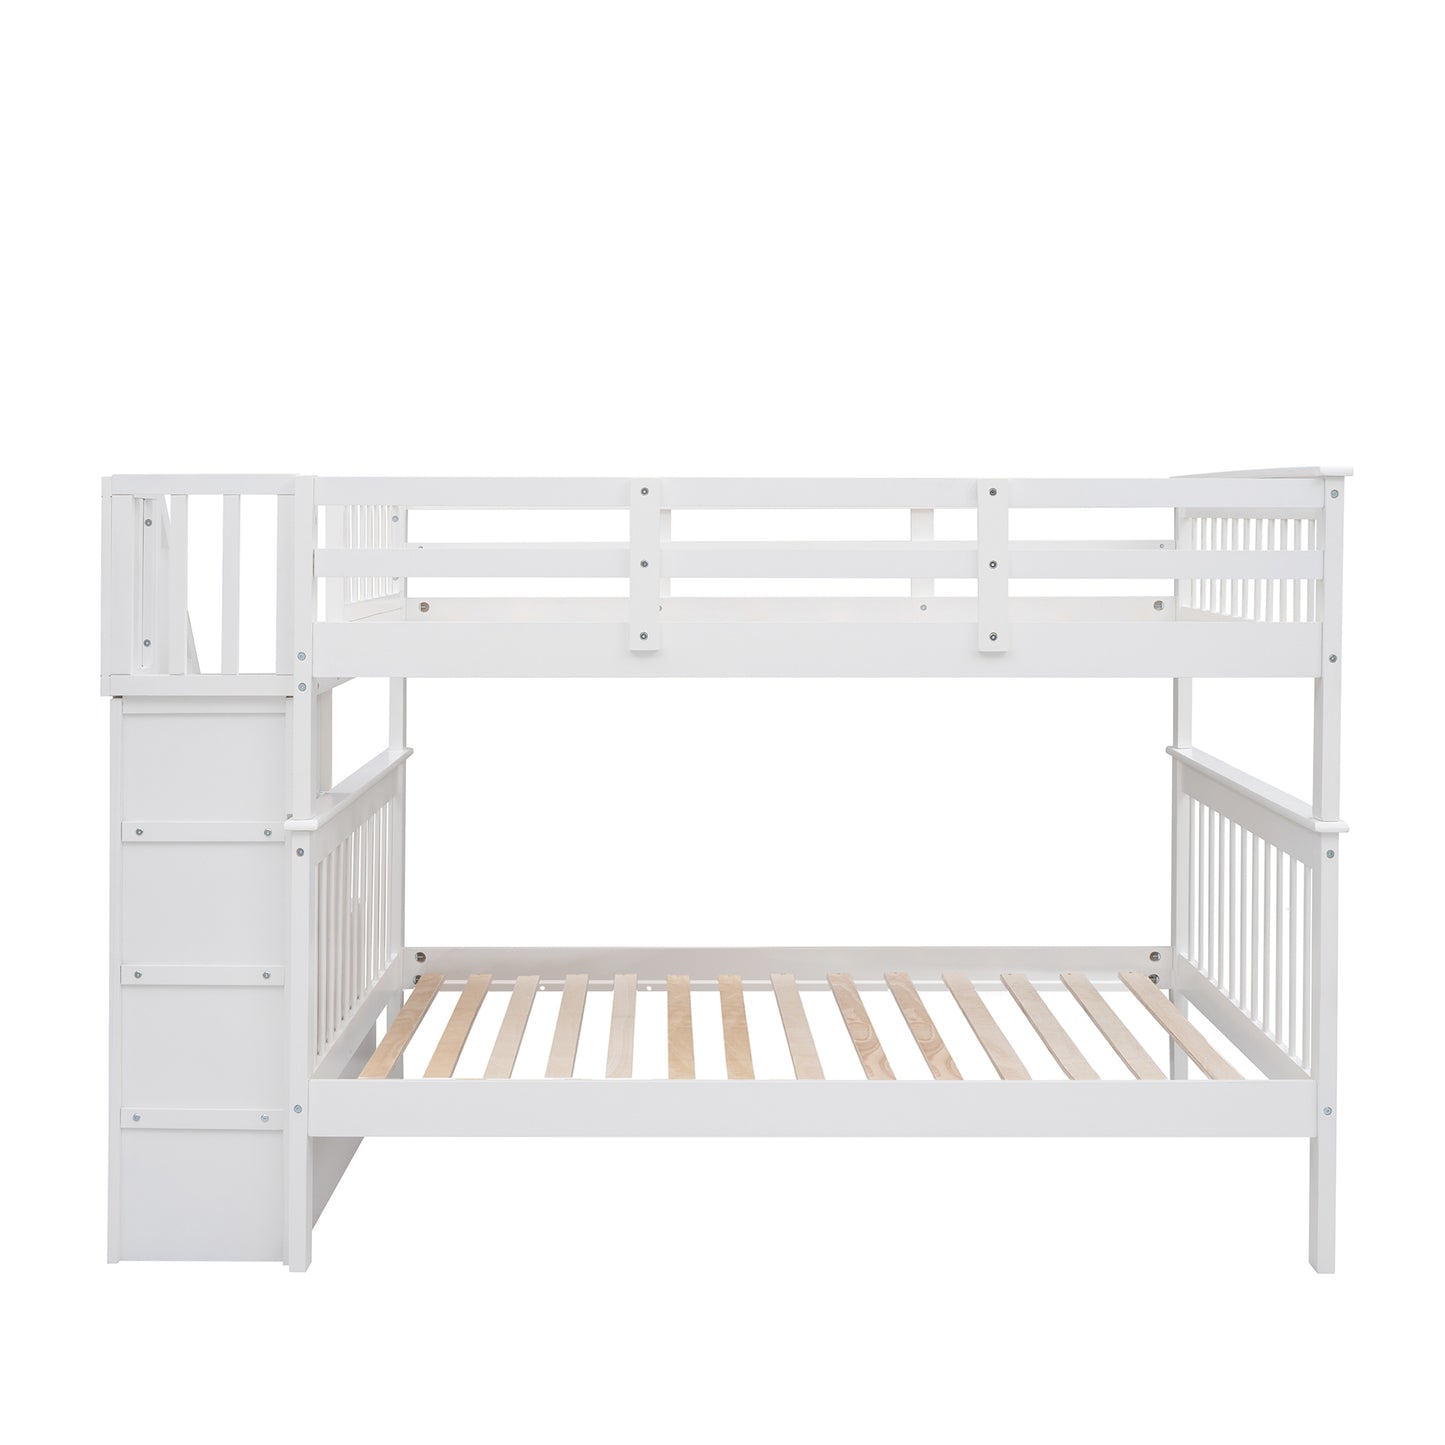 Stairway Full-Over-Full Bunk Bed with Storage and Guard Rail for Bedroom, Dorm, White color